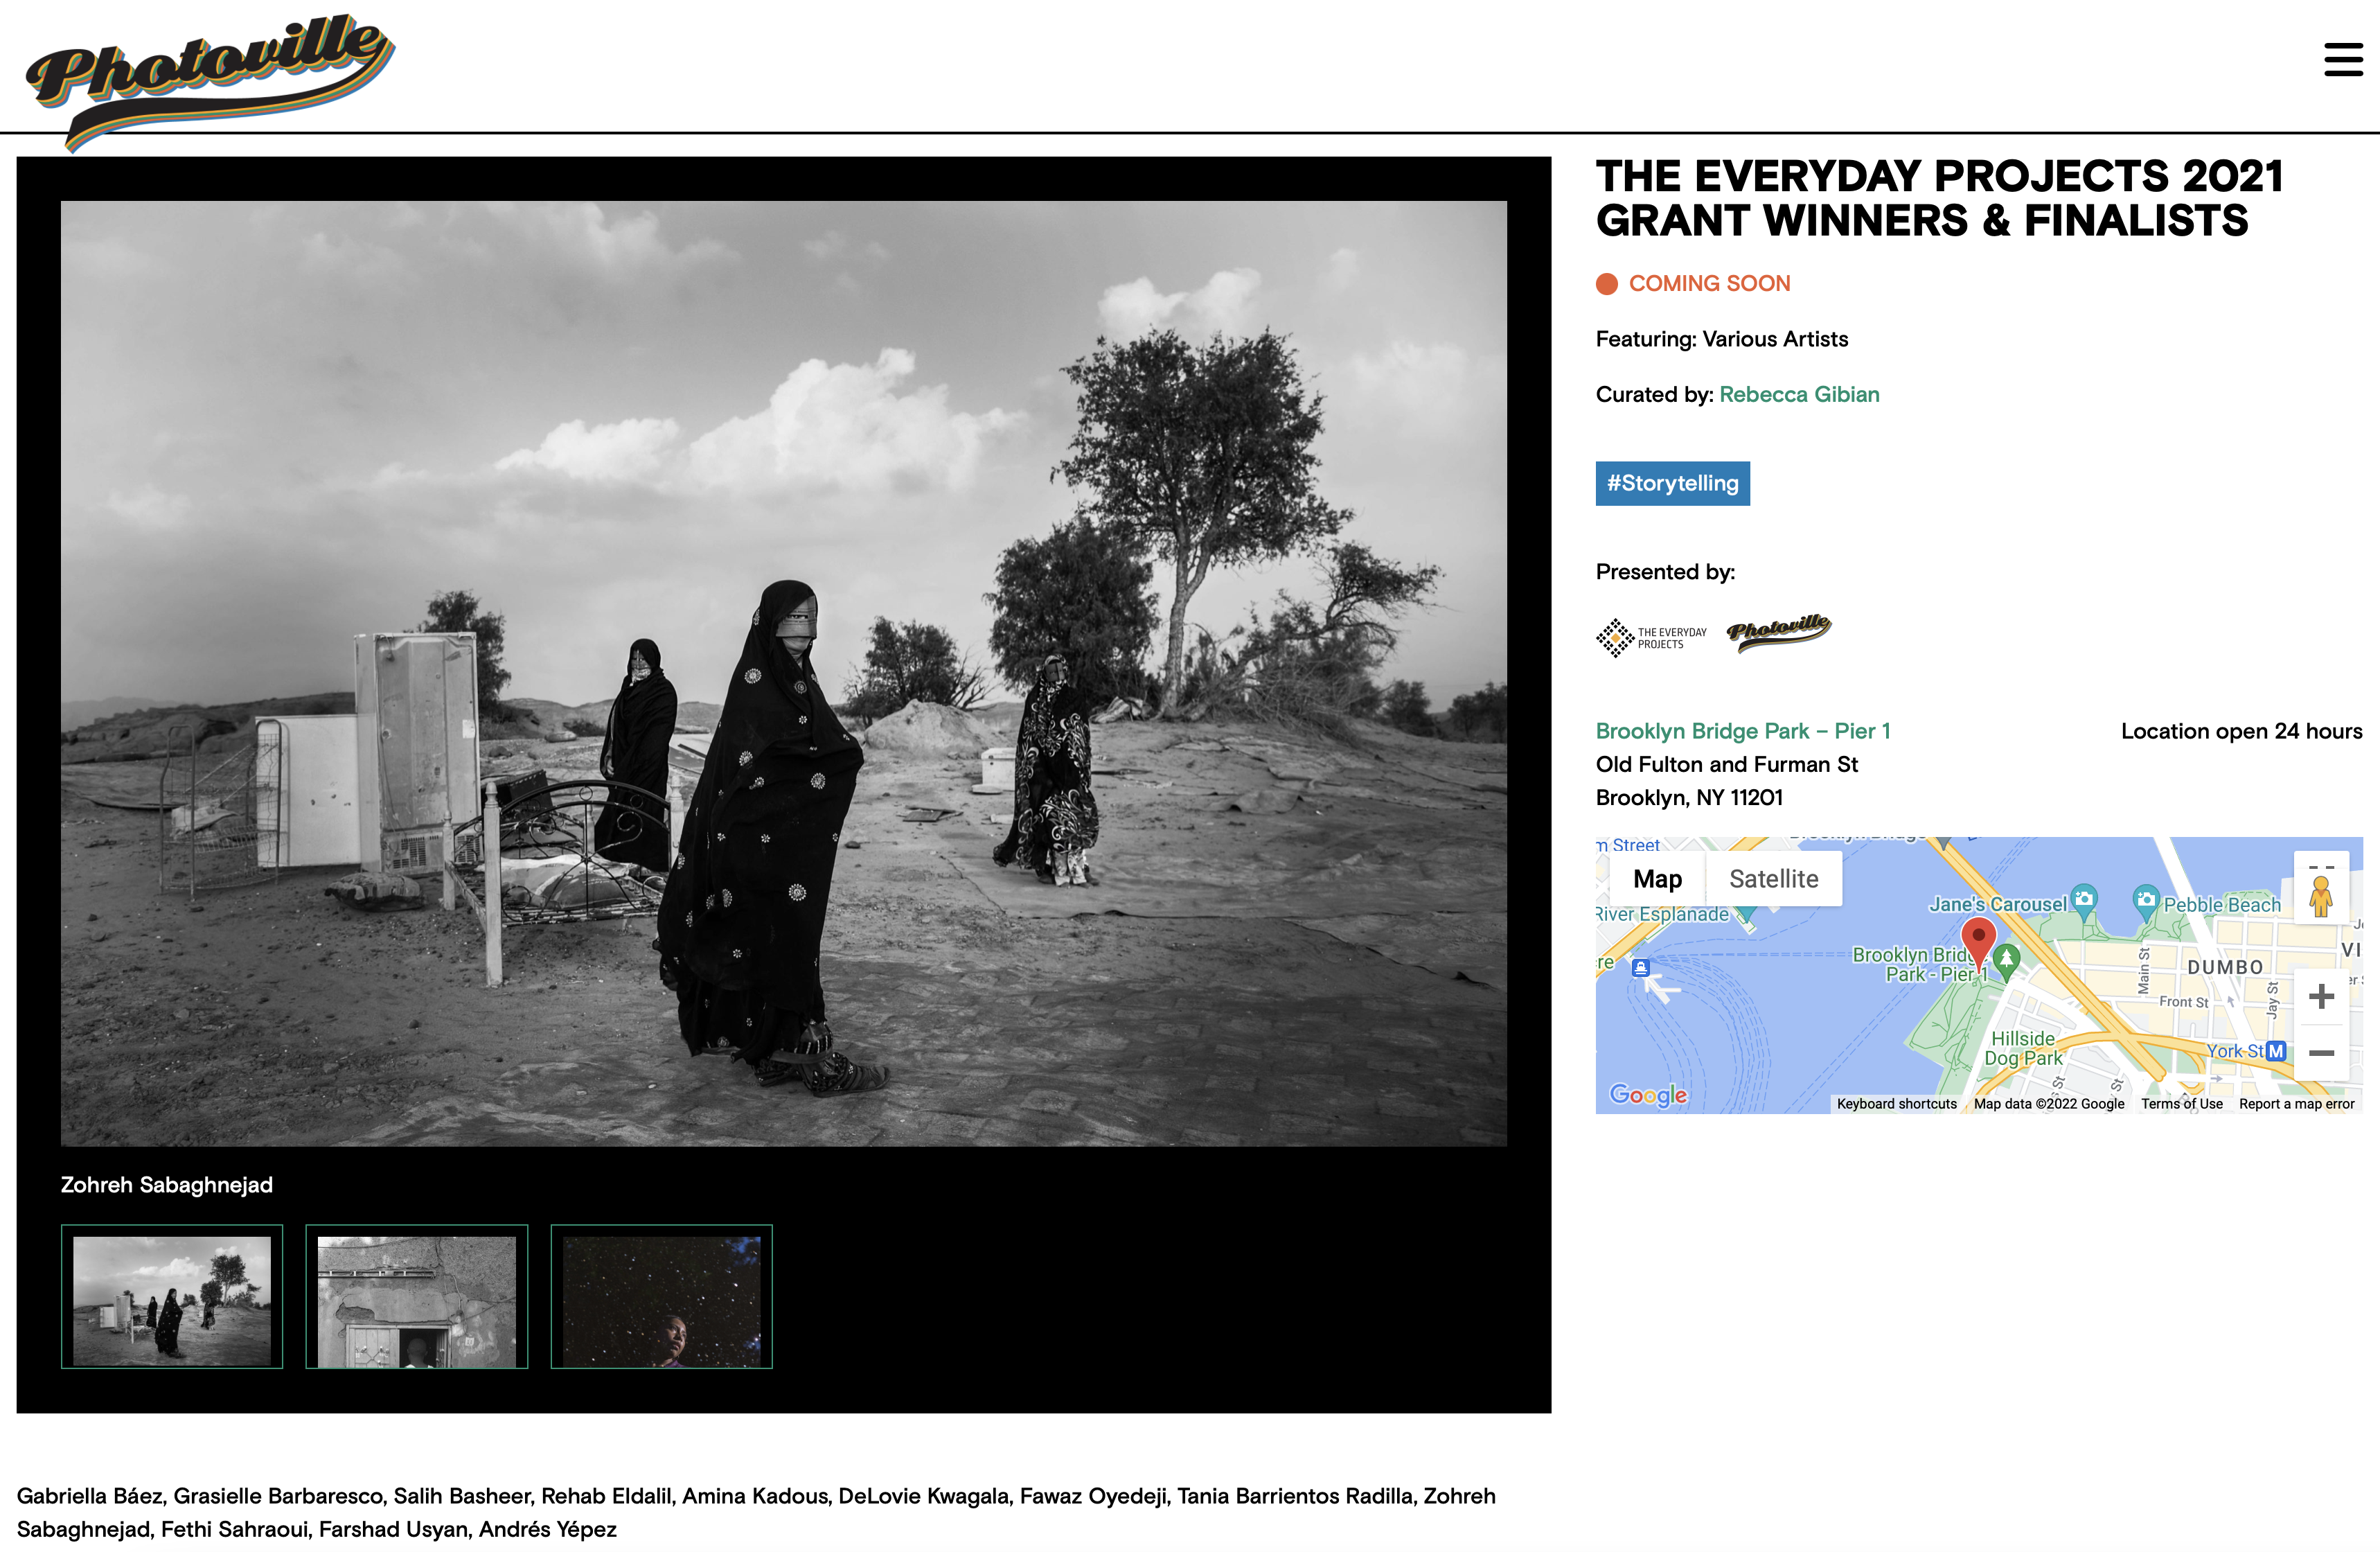 Thumbnail of The Everyday Projects 2021 Grant Winners & Finalists at Photoville!